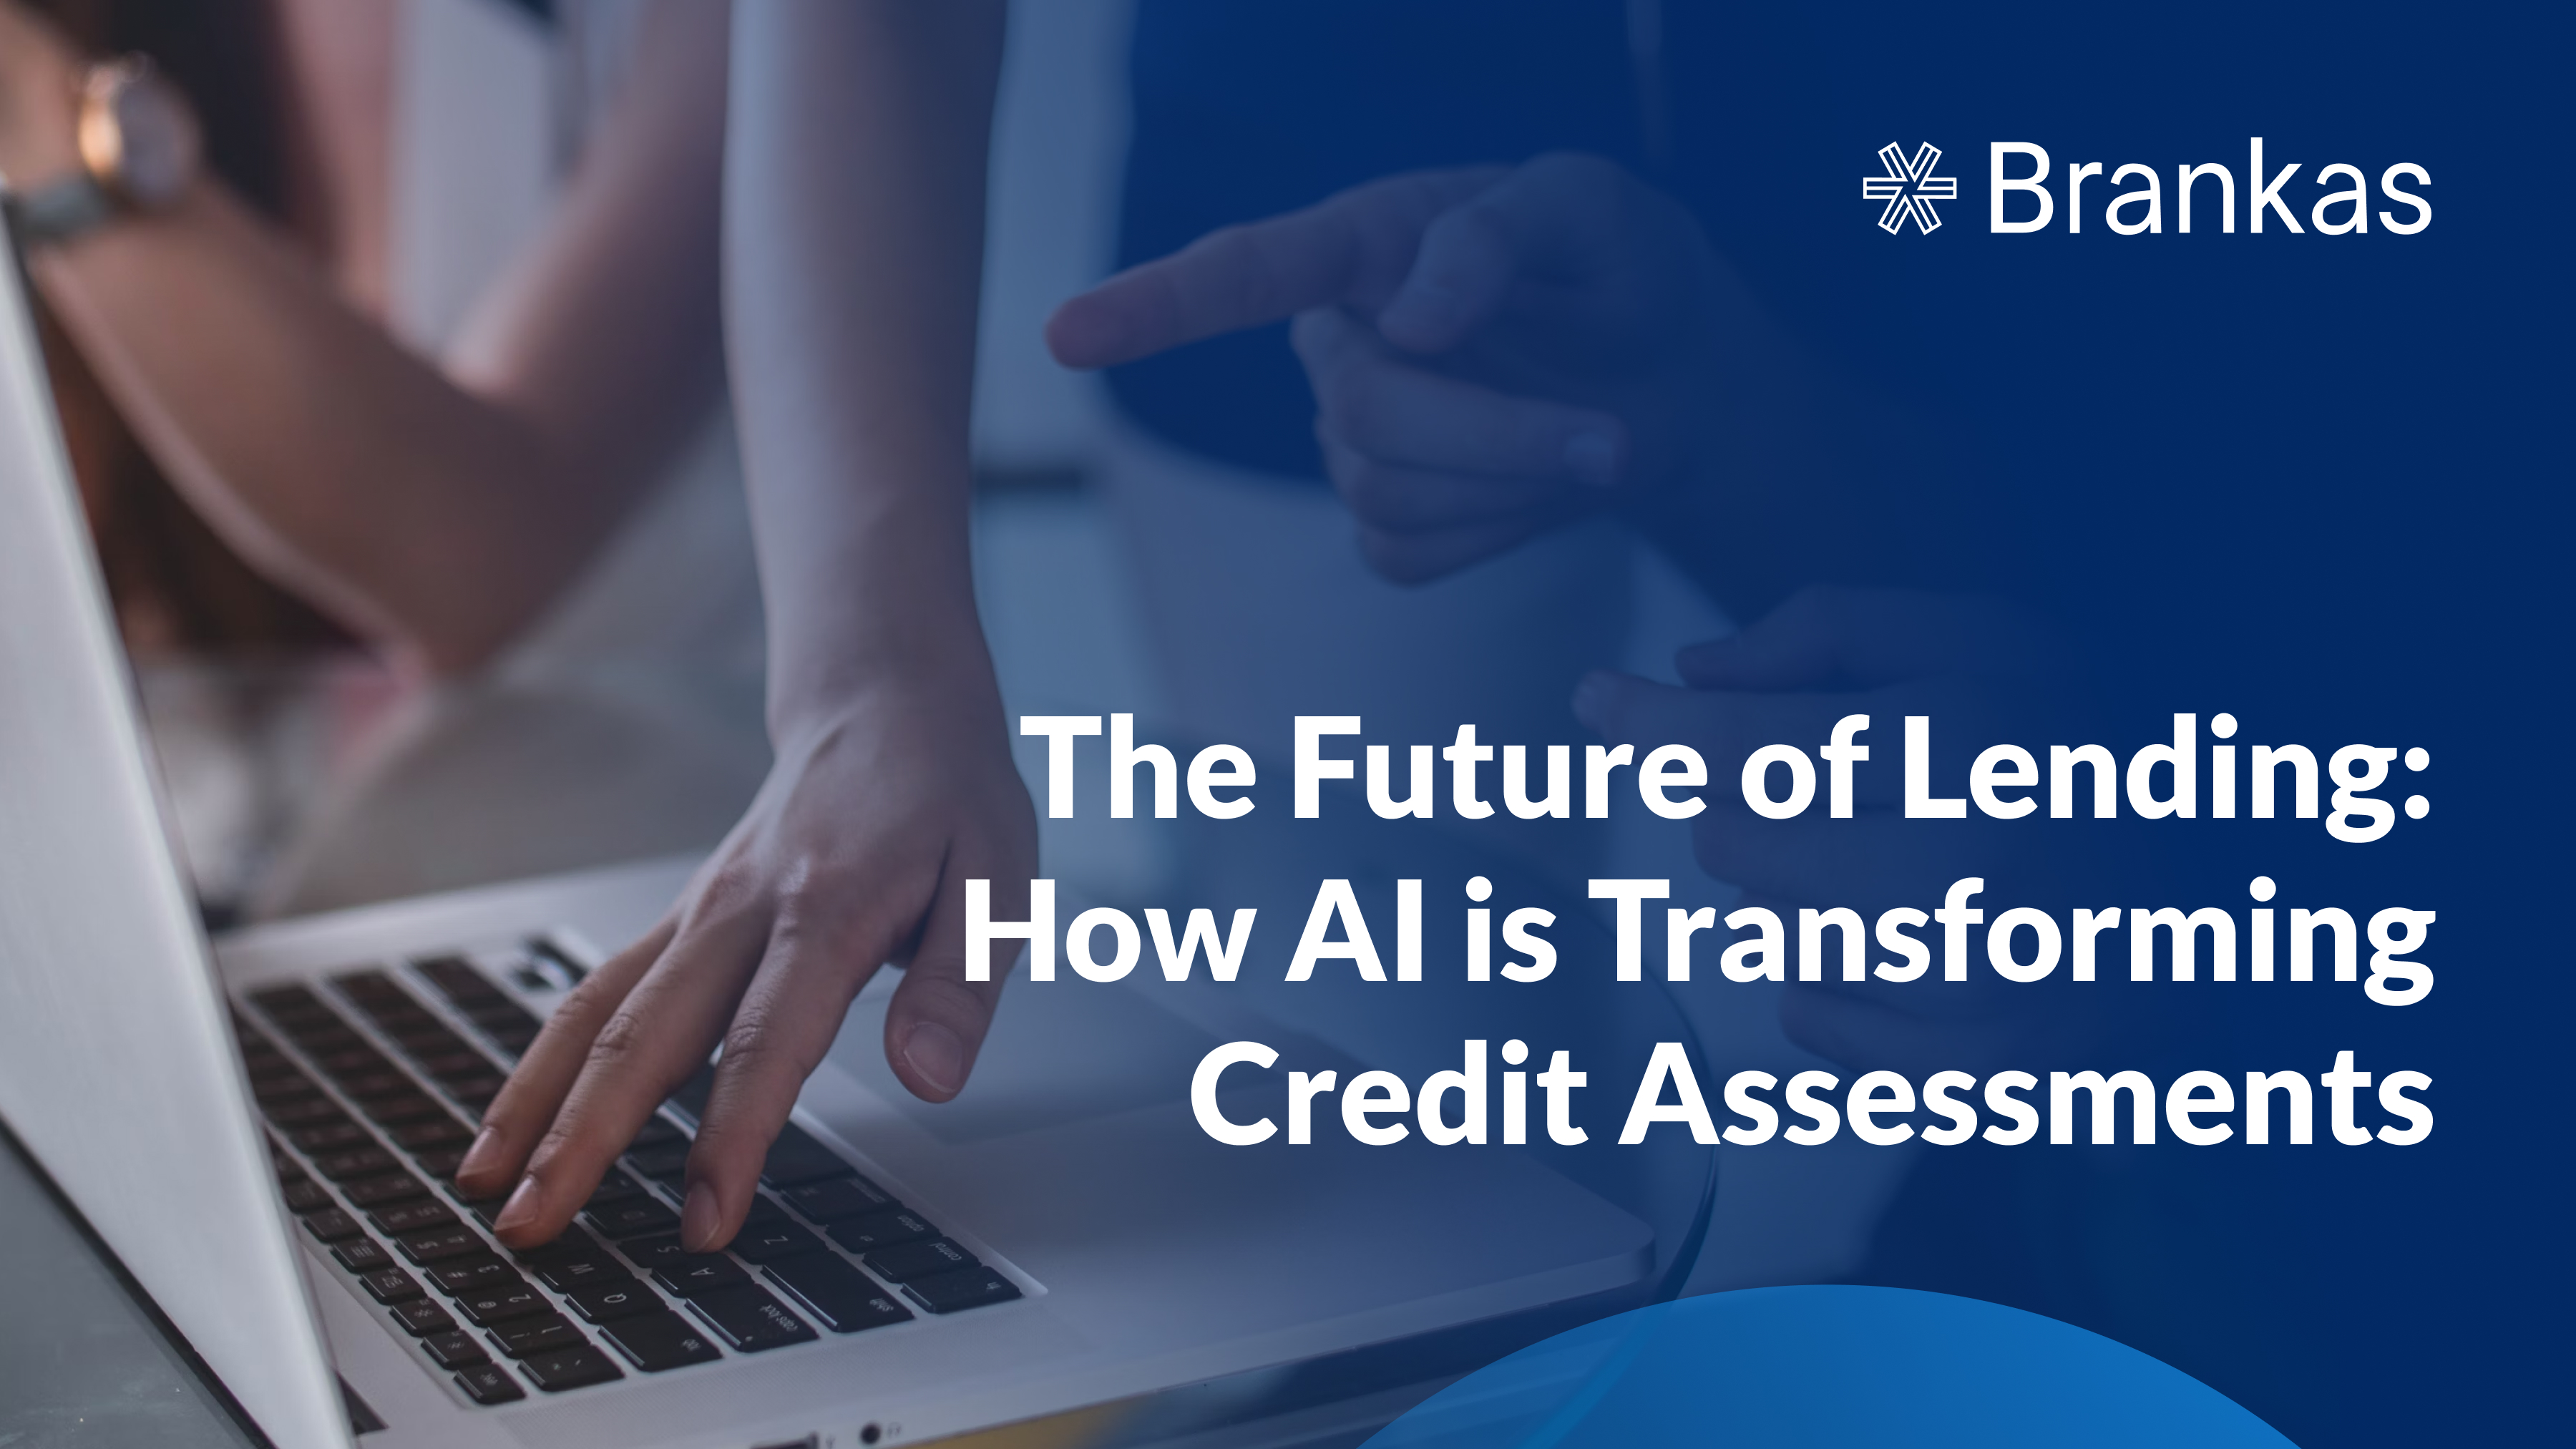 The Future of Lending: How AI is Transforming Credit Assessments